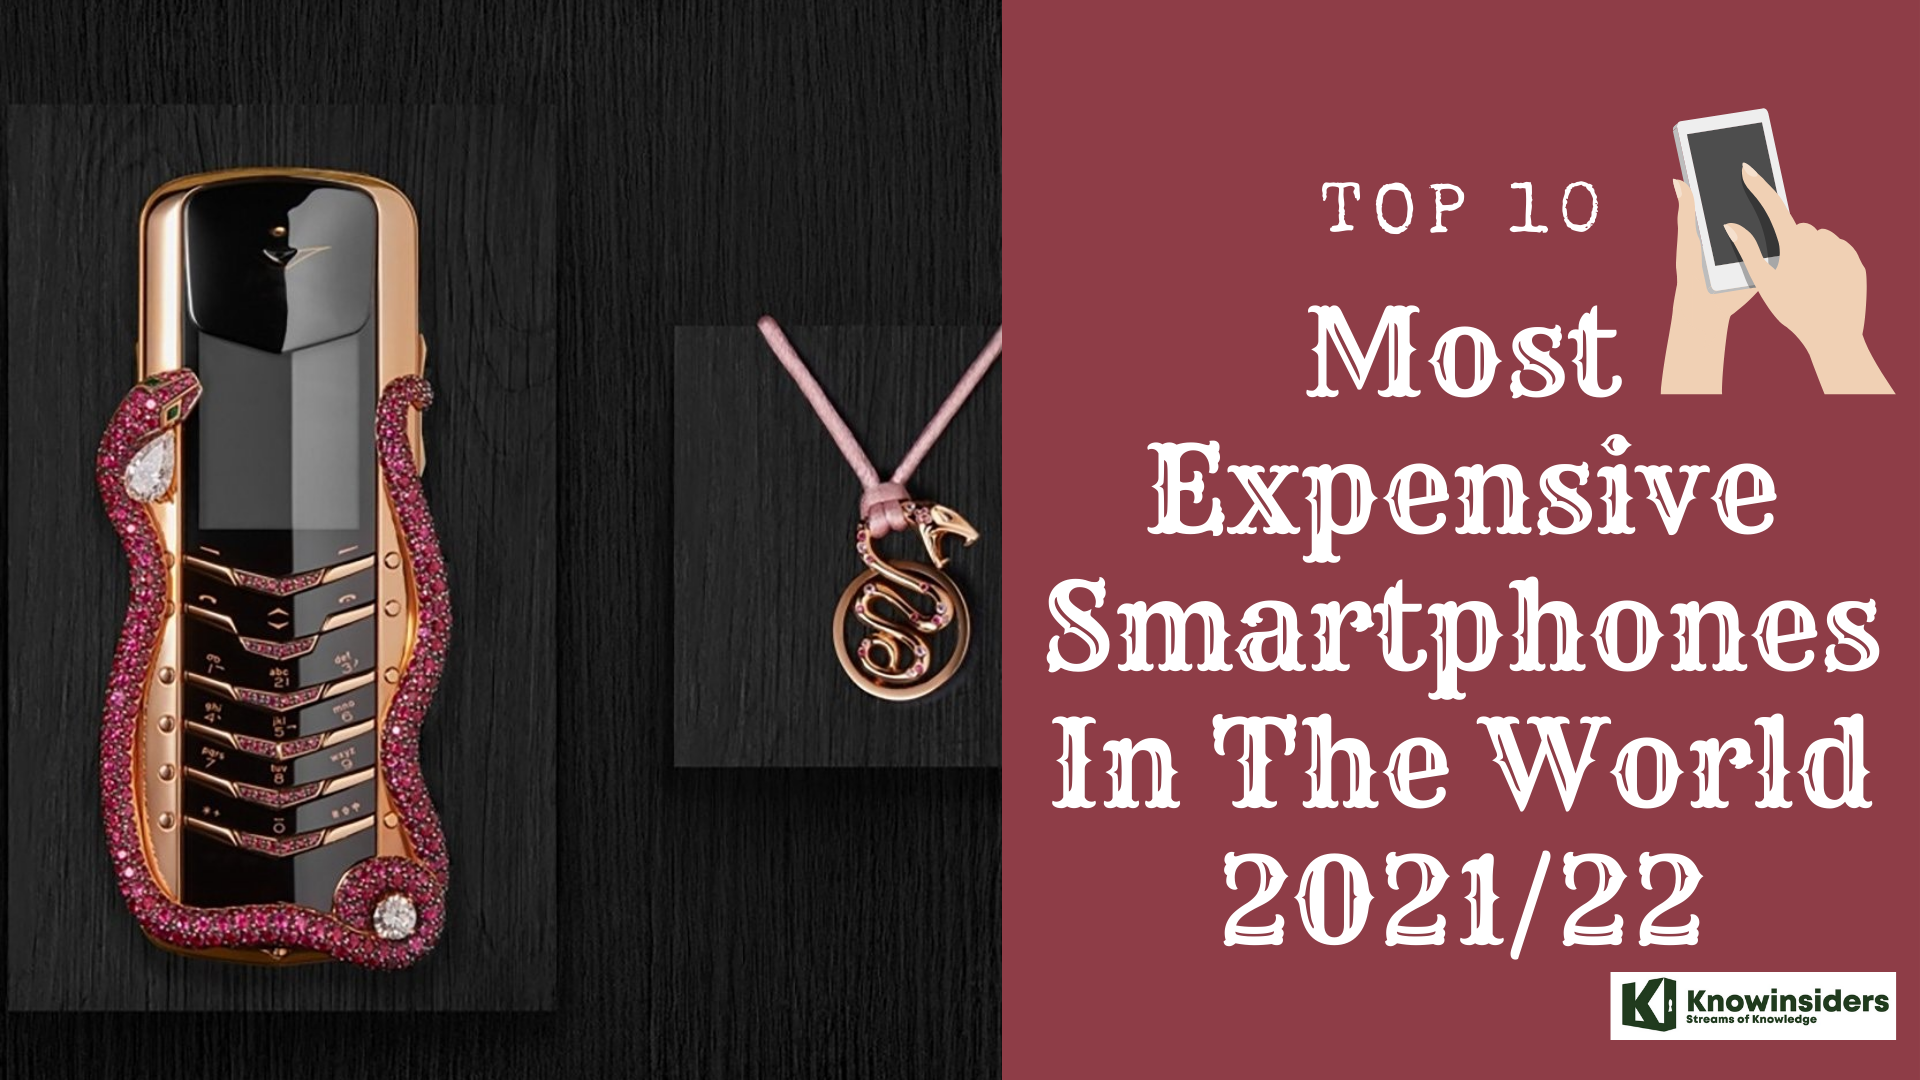 Top 10 Most Expensive Mobilephones In the World